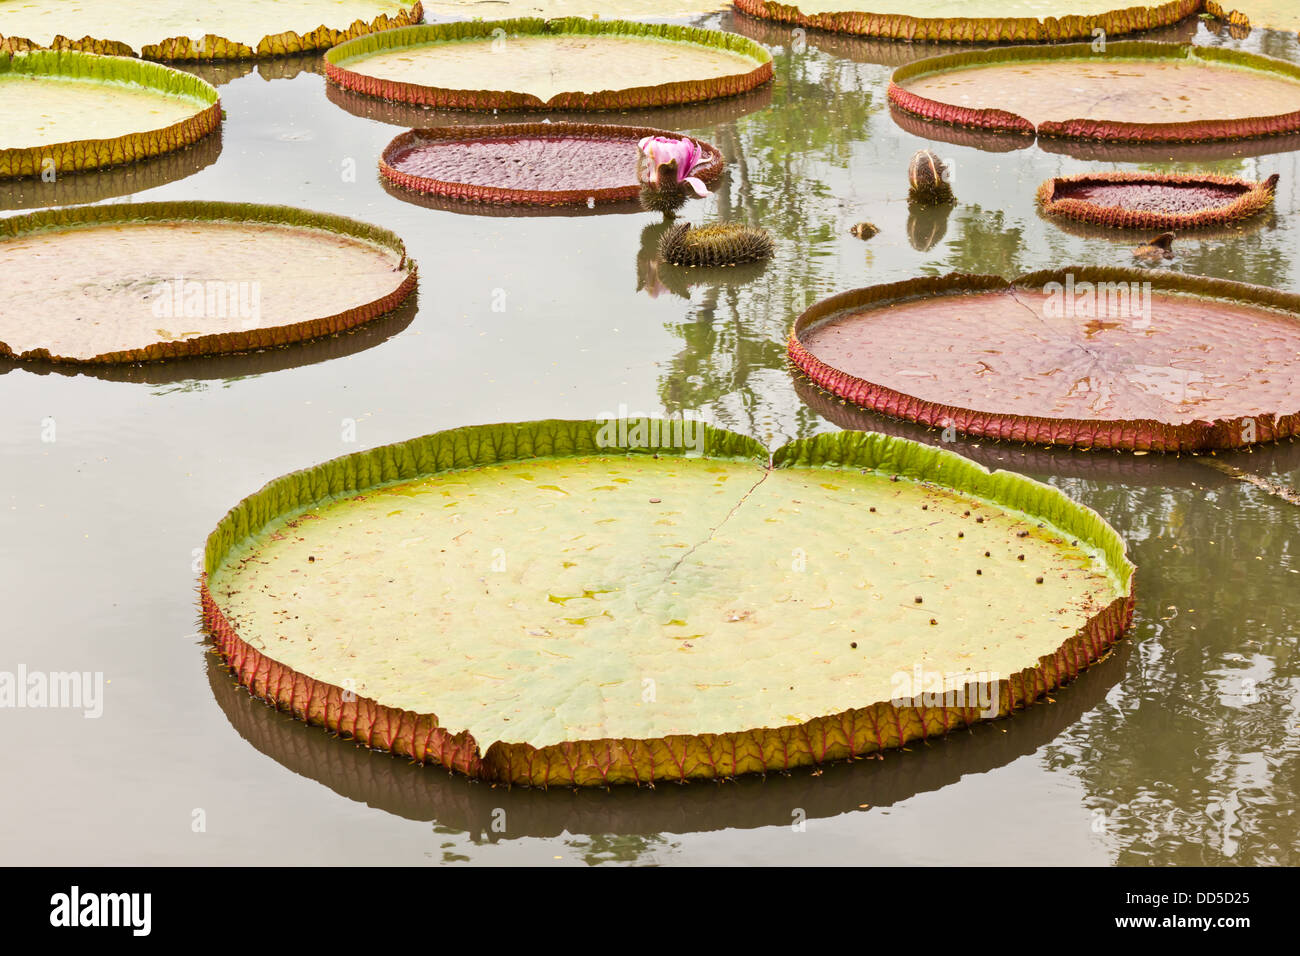 leaf of lotus in pond Stock Photo